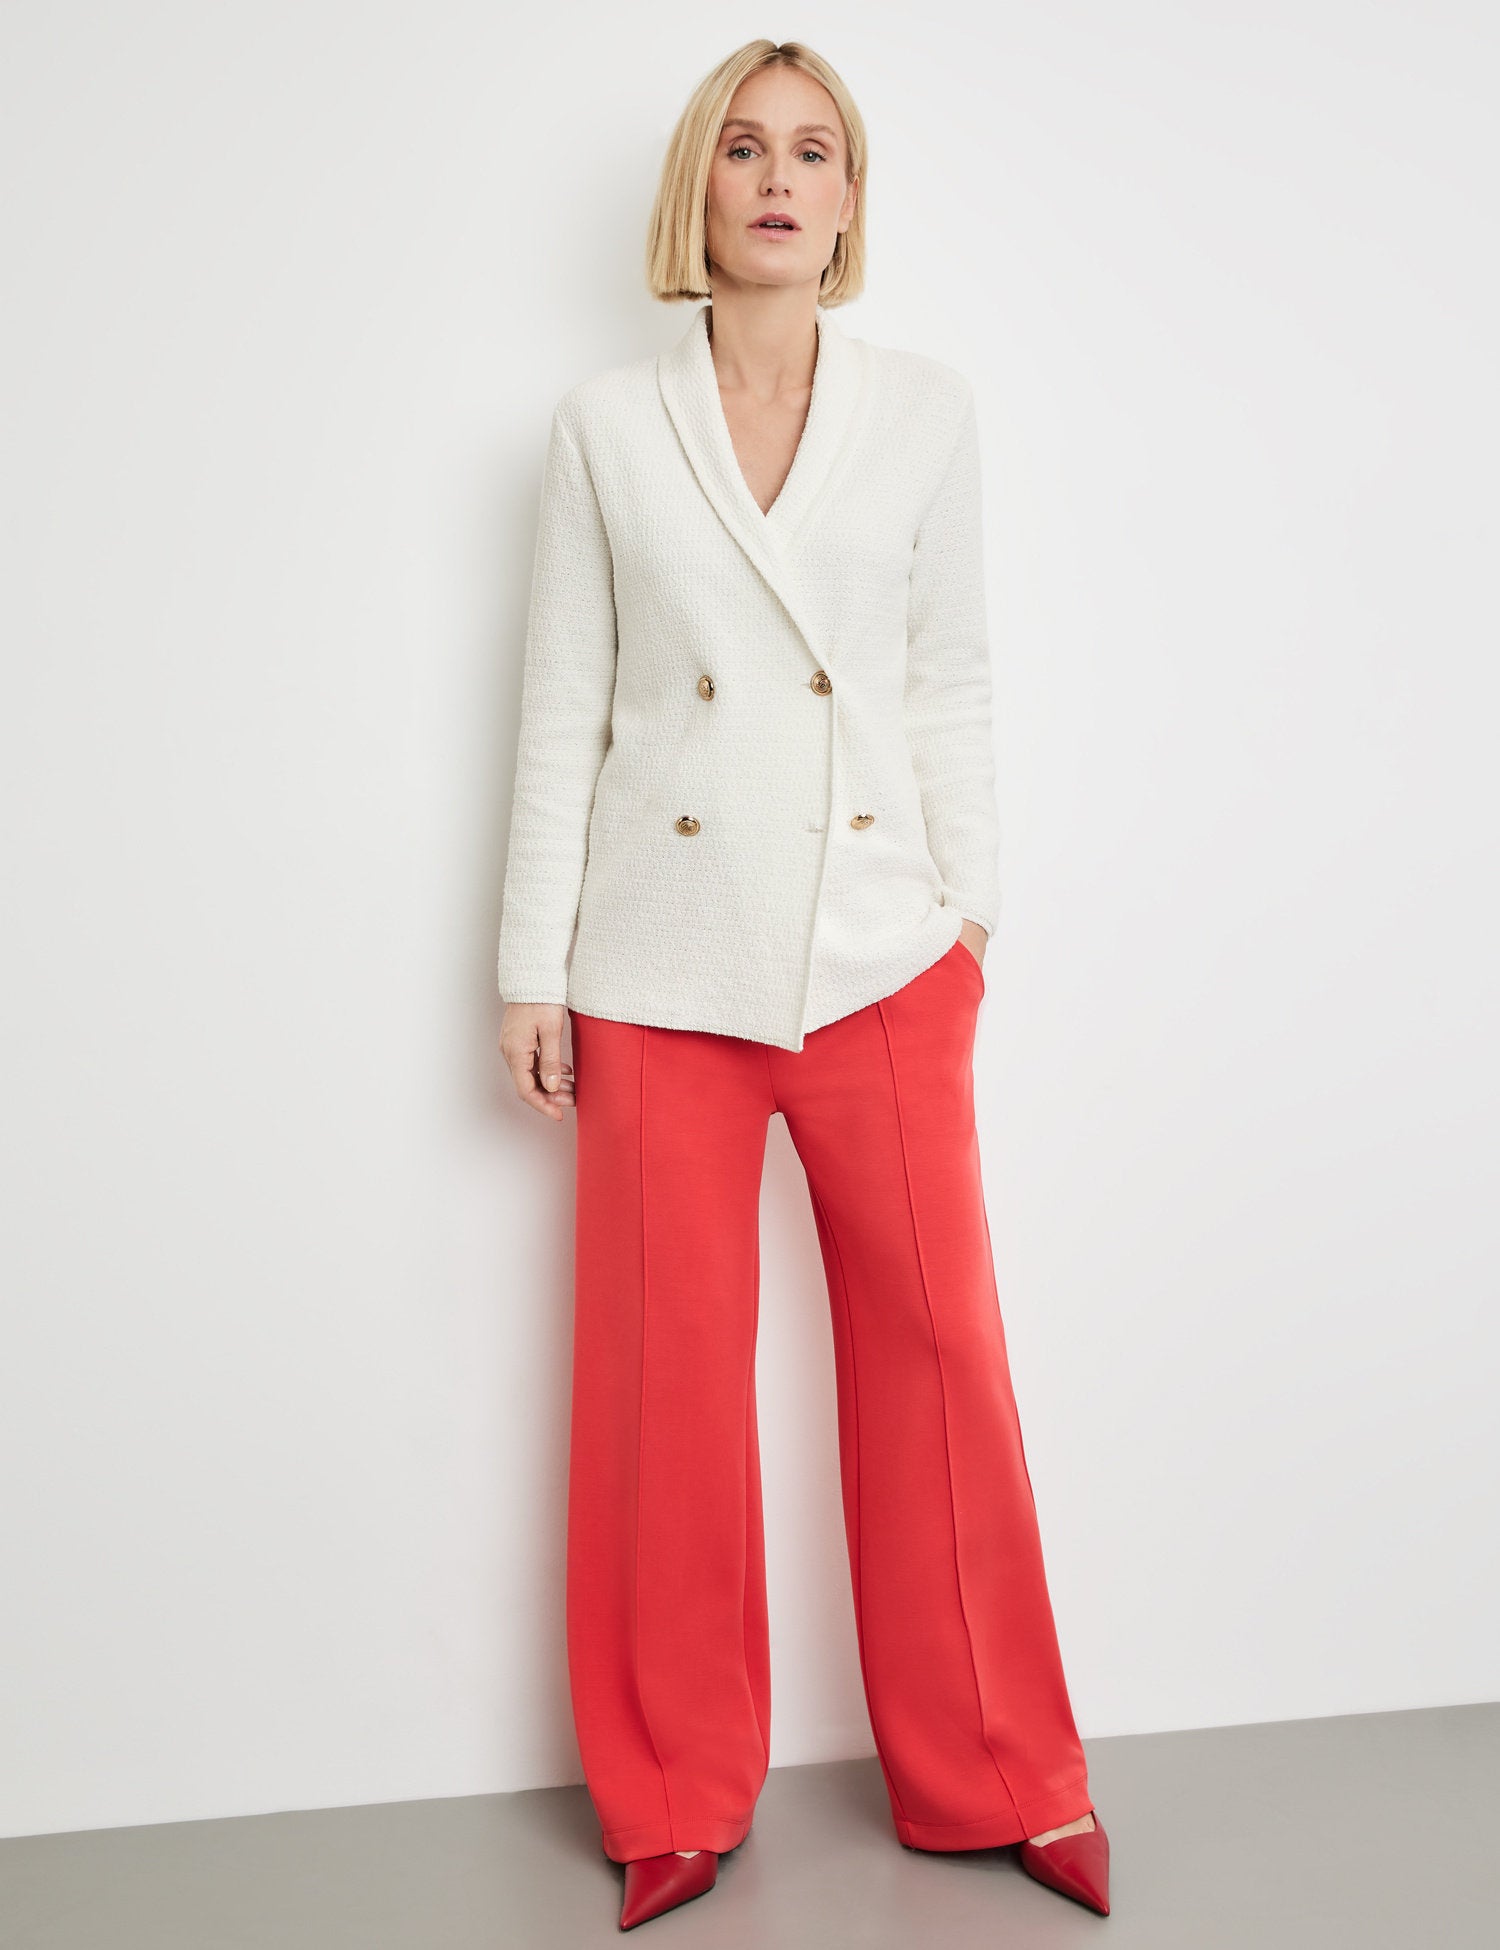 Cardigan In A Textured Knit With A Double-Breasted Button Placket_330019-35738_99700_05